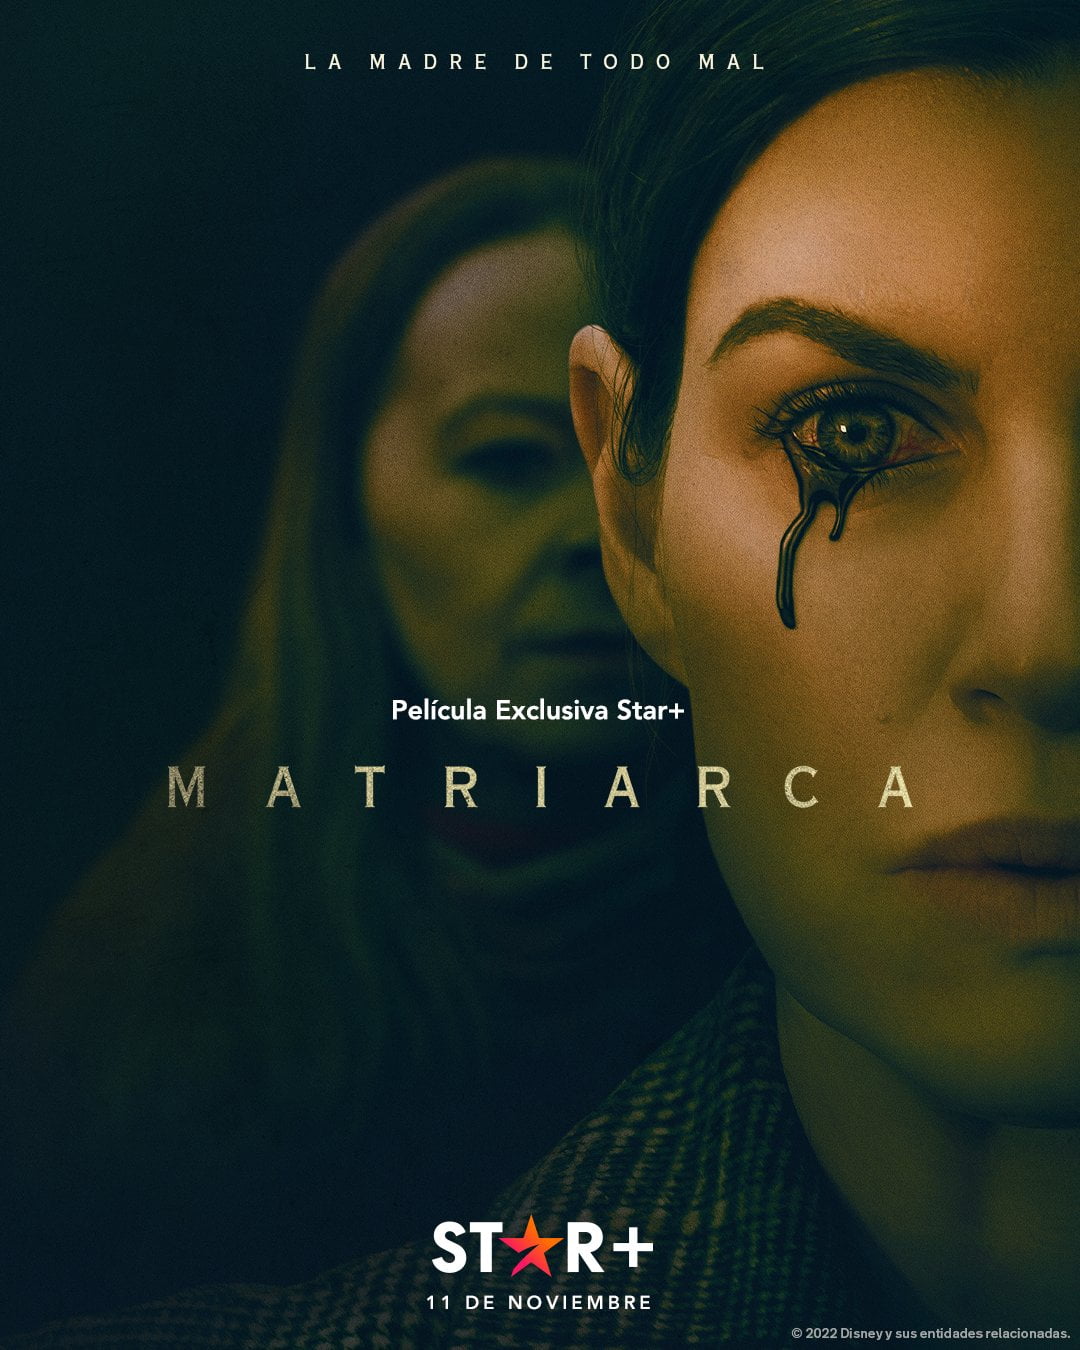  Matriarch Movie 2022, Official Trailer, Release Date, HD Poster 